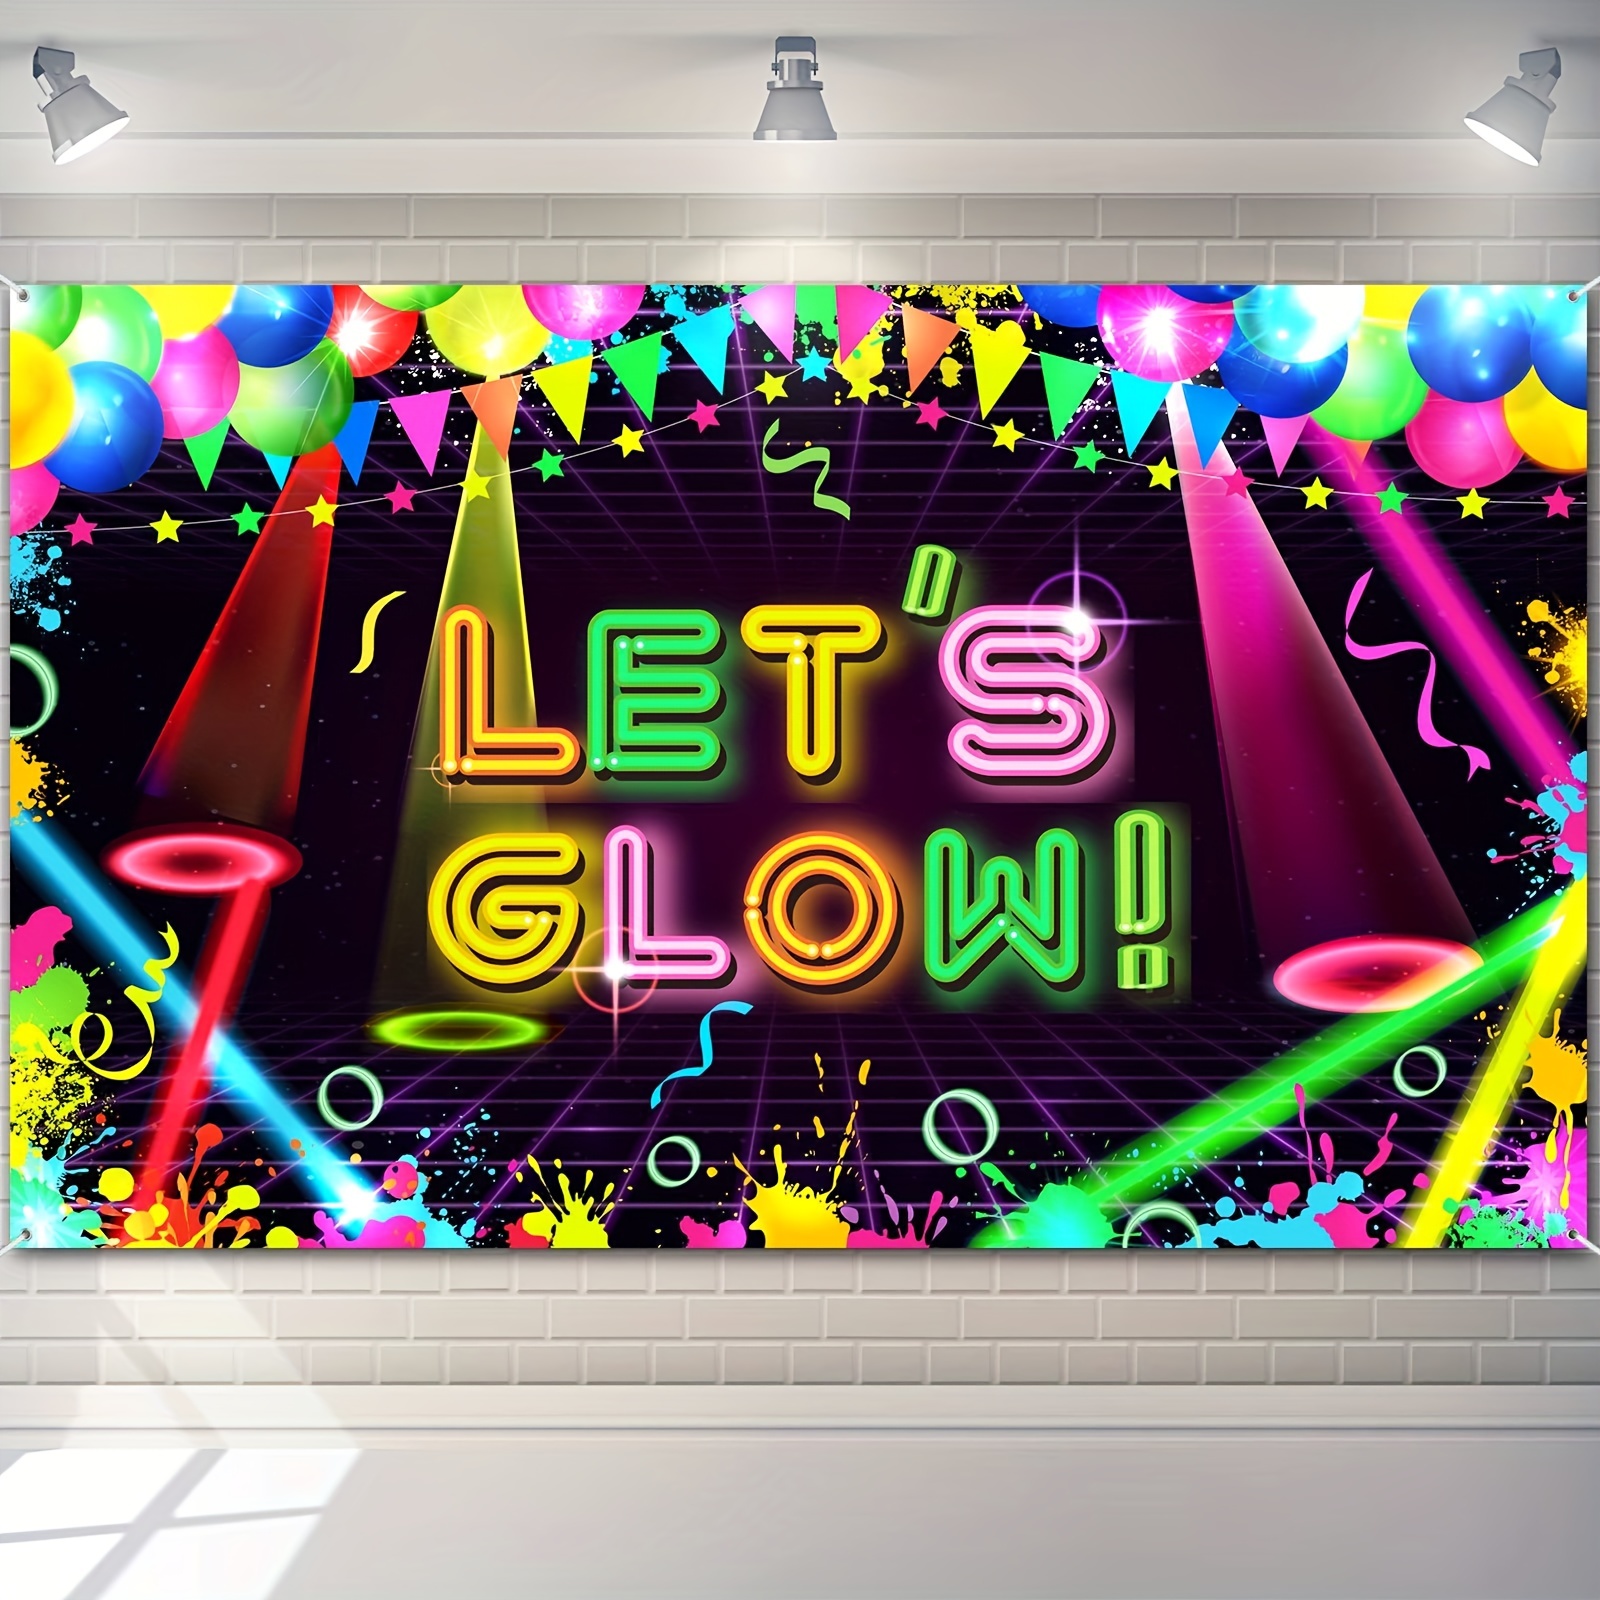 Bright Neon Party Supplies Set - Serves 32 Guest, Includes Plates 9, Cups  Tumbl